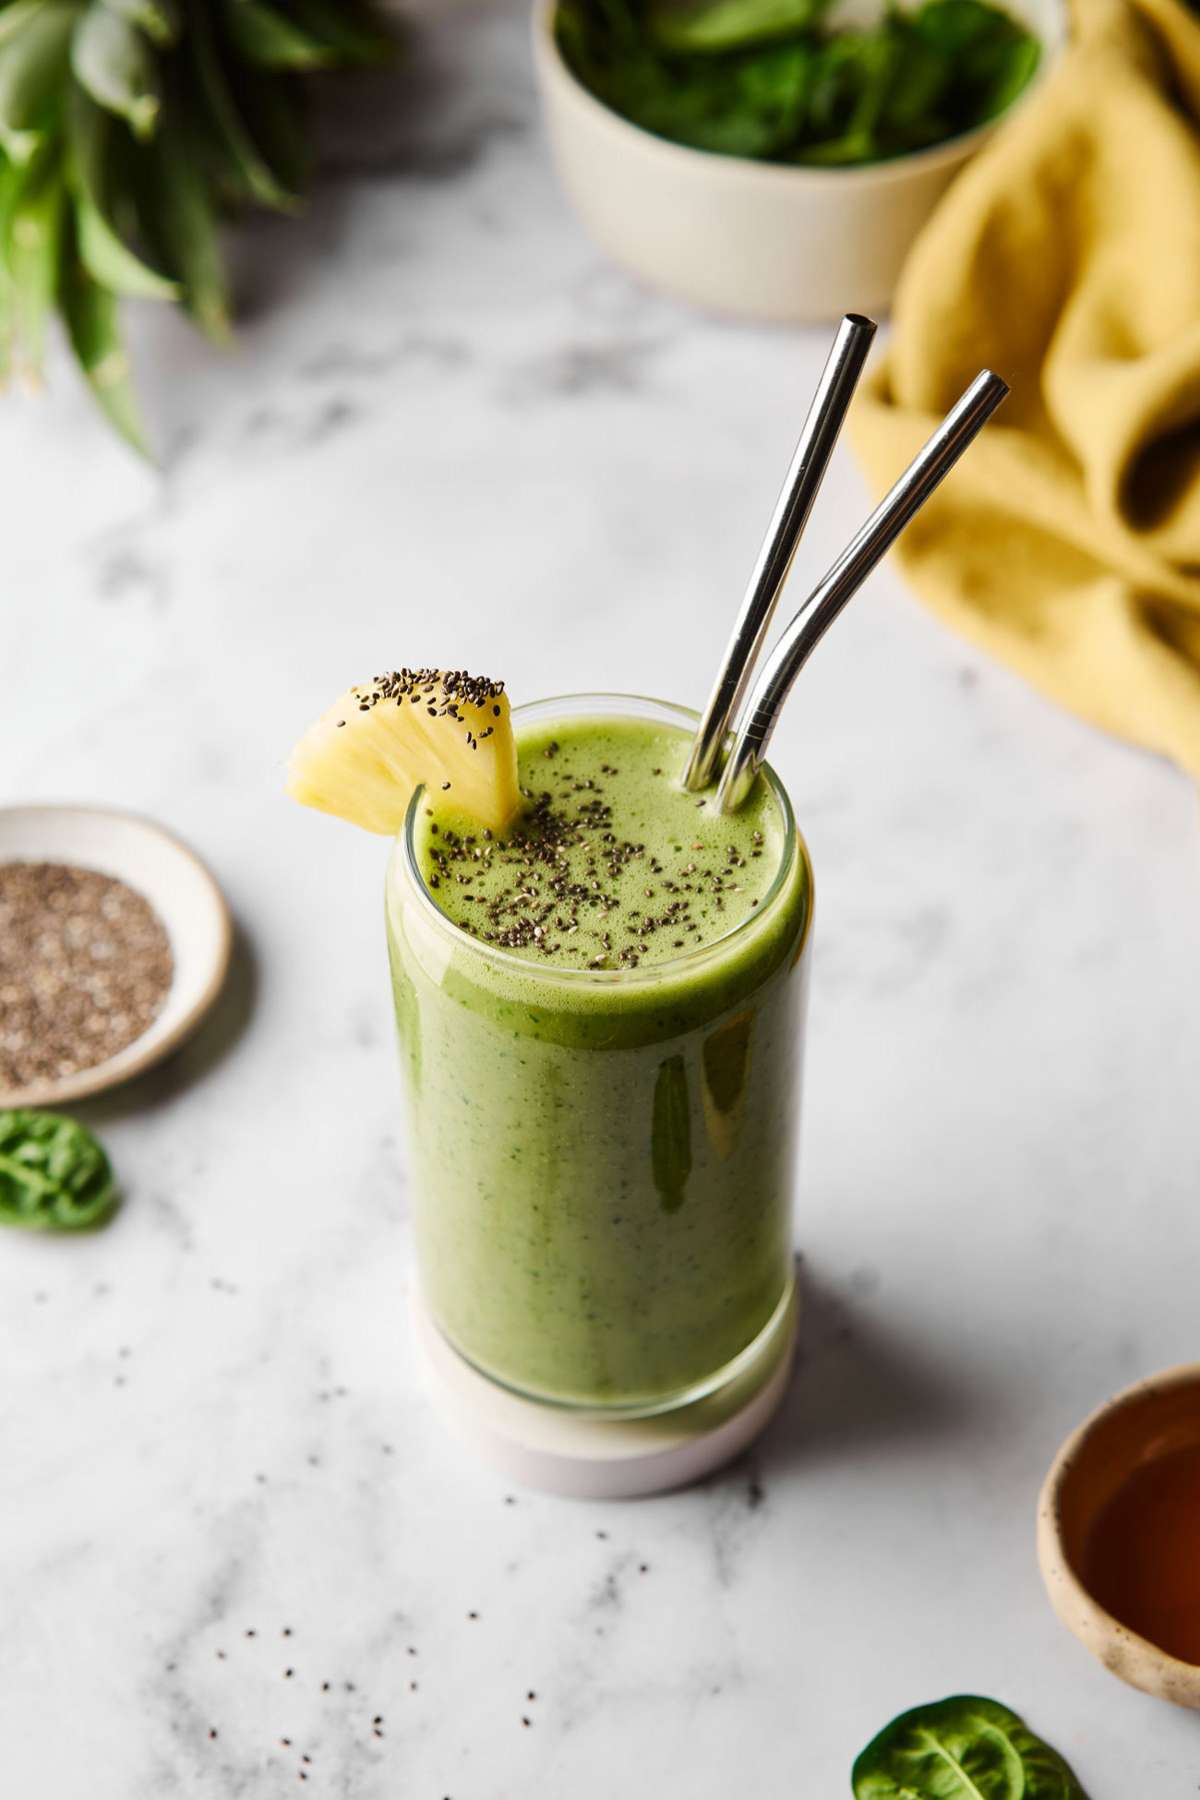 Green smoothie garnished with pineapple and chia seeds.